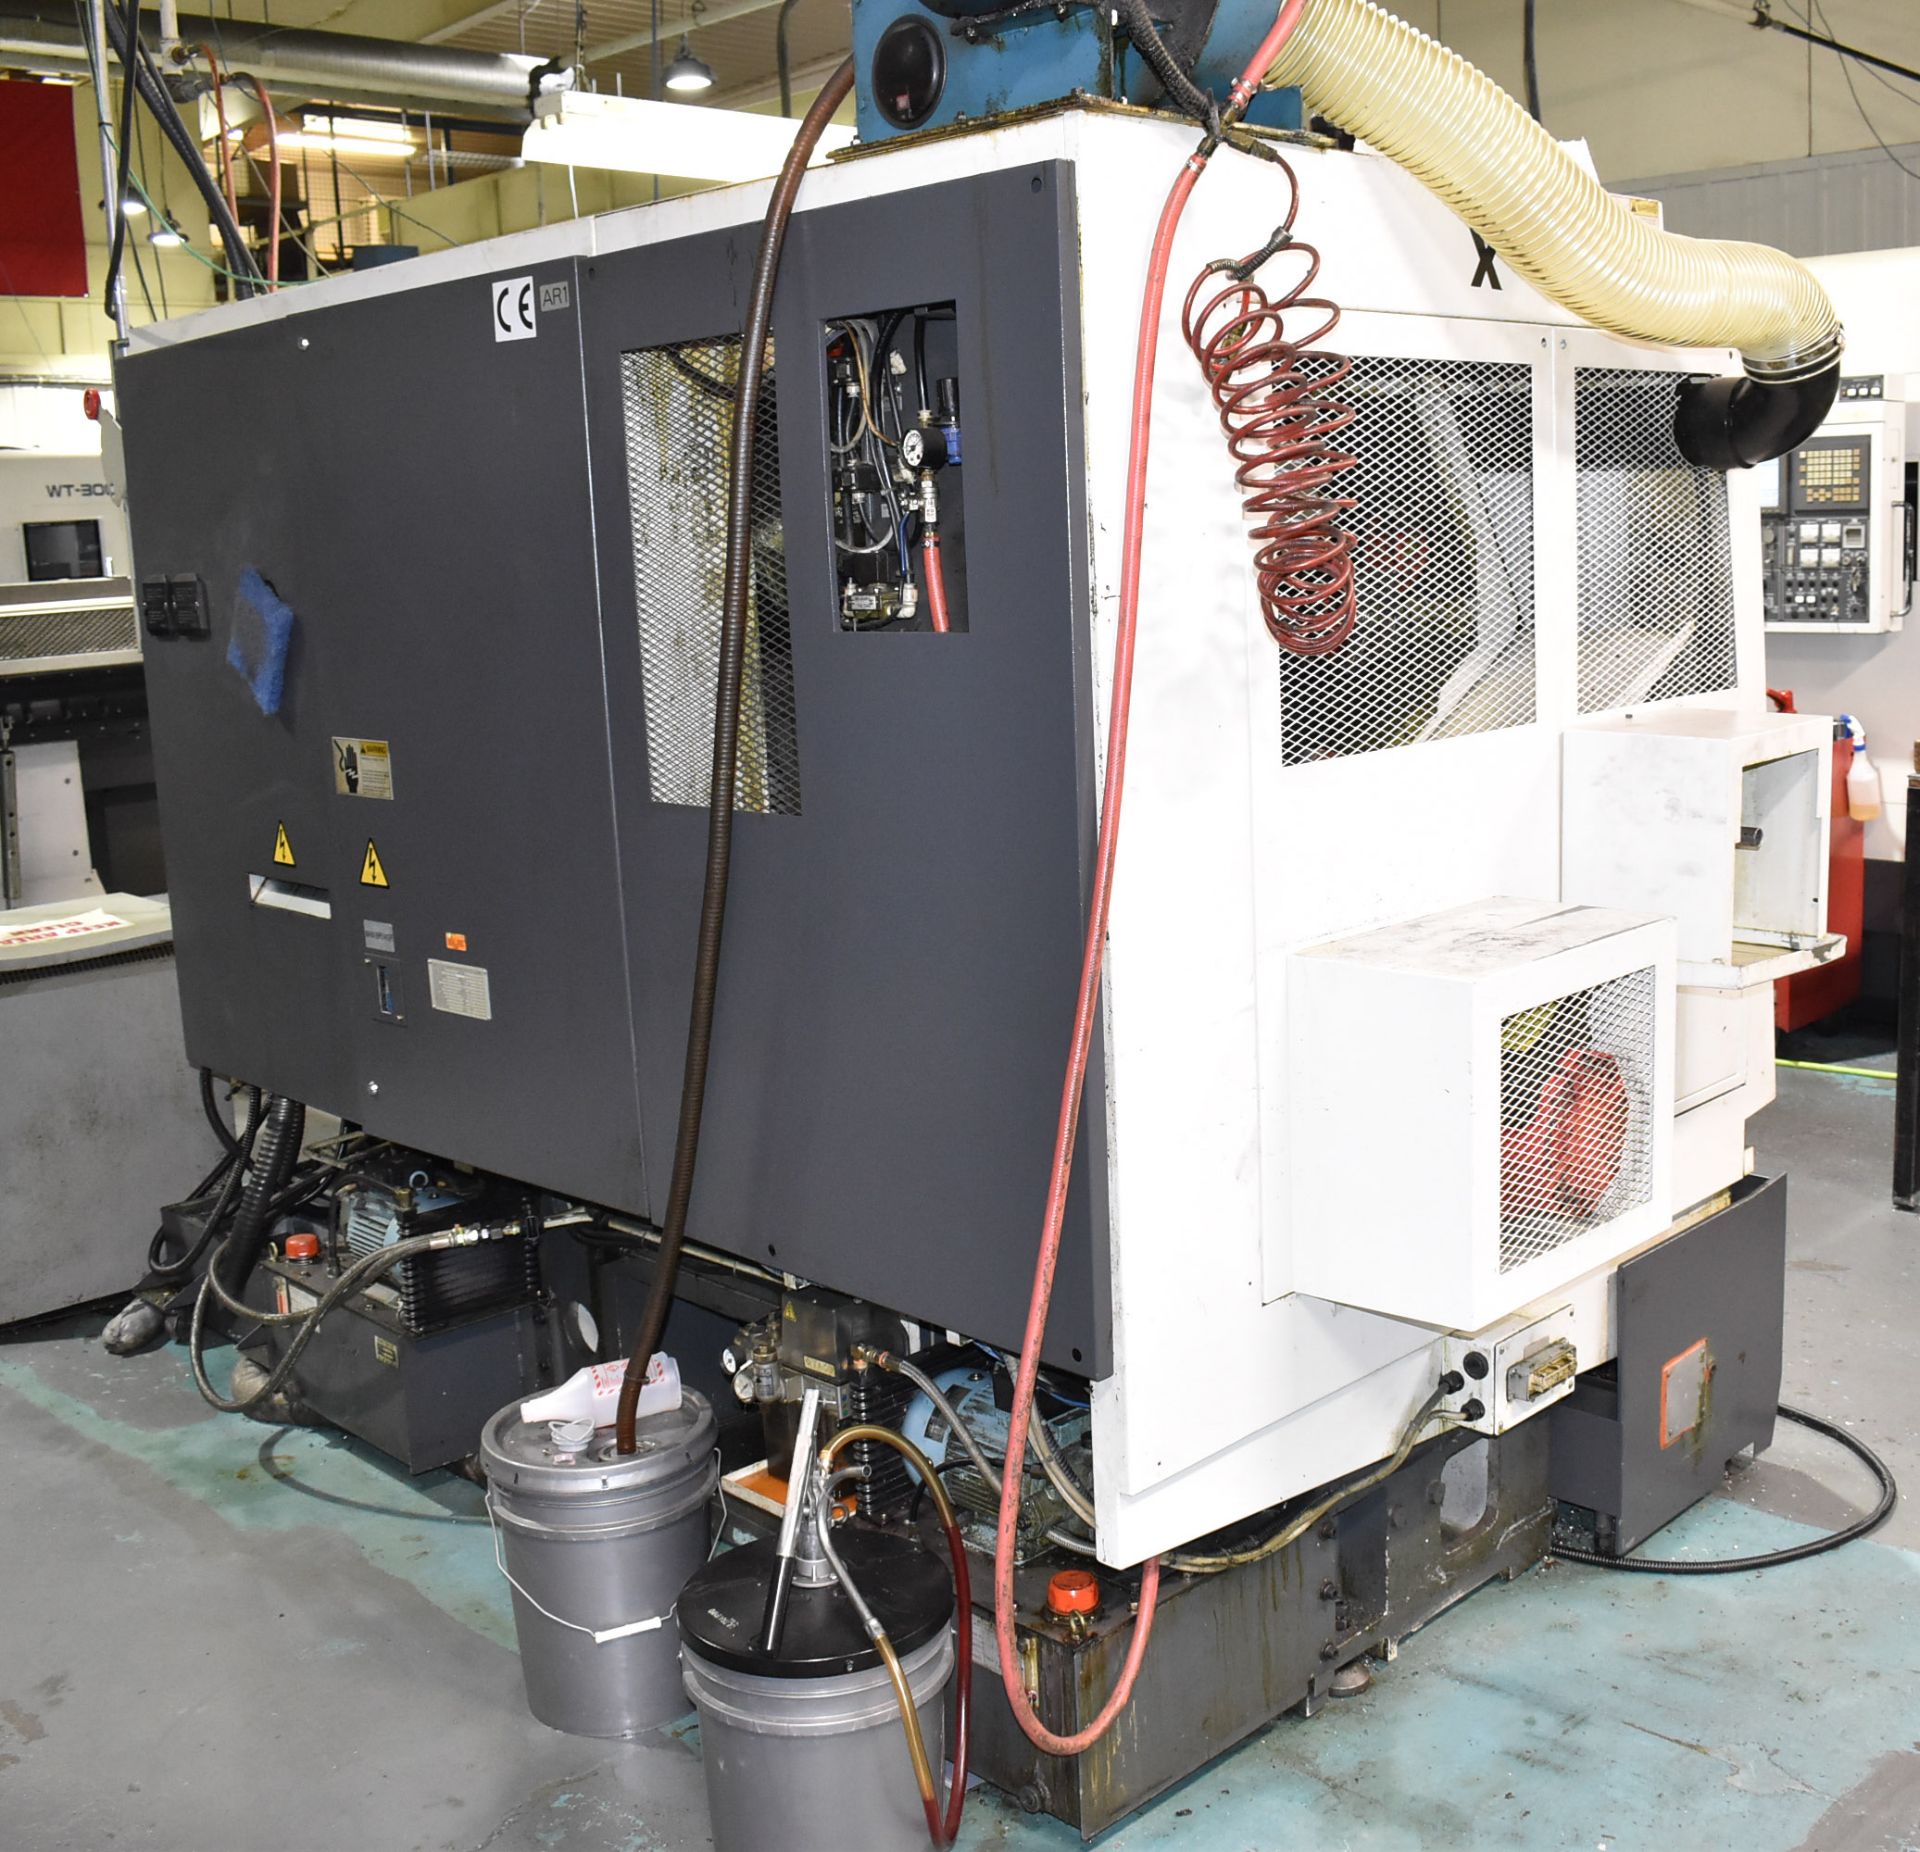 NAKAMURA-TOME WT-100 MULTI-AXIS OPPOSED SPINDLE AND TWIN TURRET CNC MULTI-TASKING CENTER WITH - Image 12 of 17